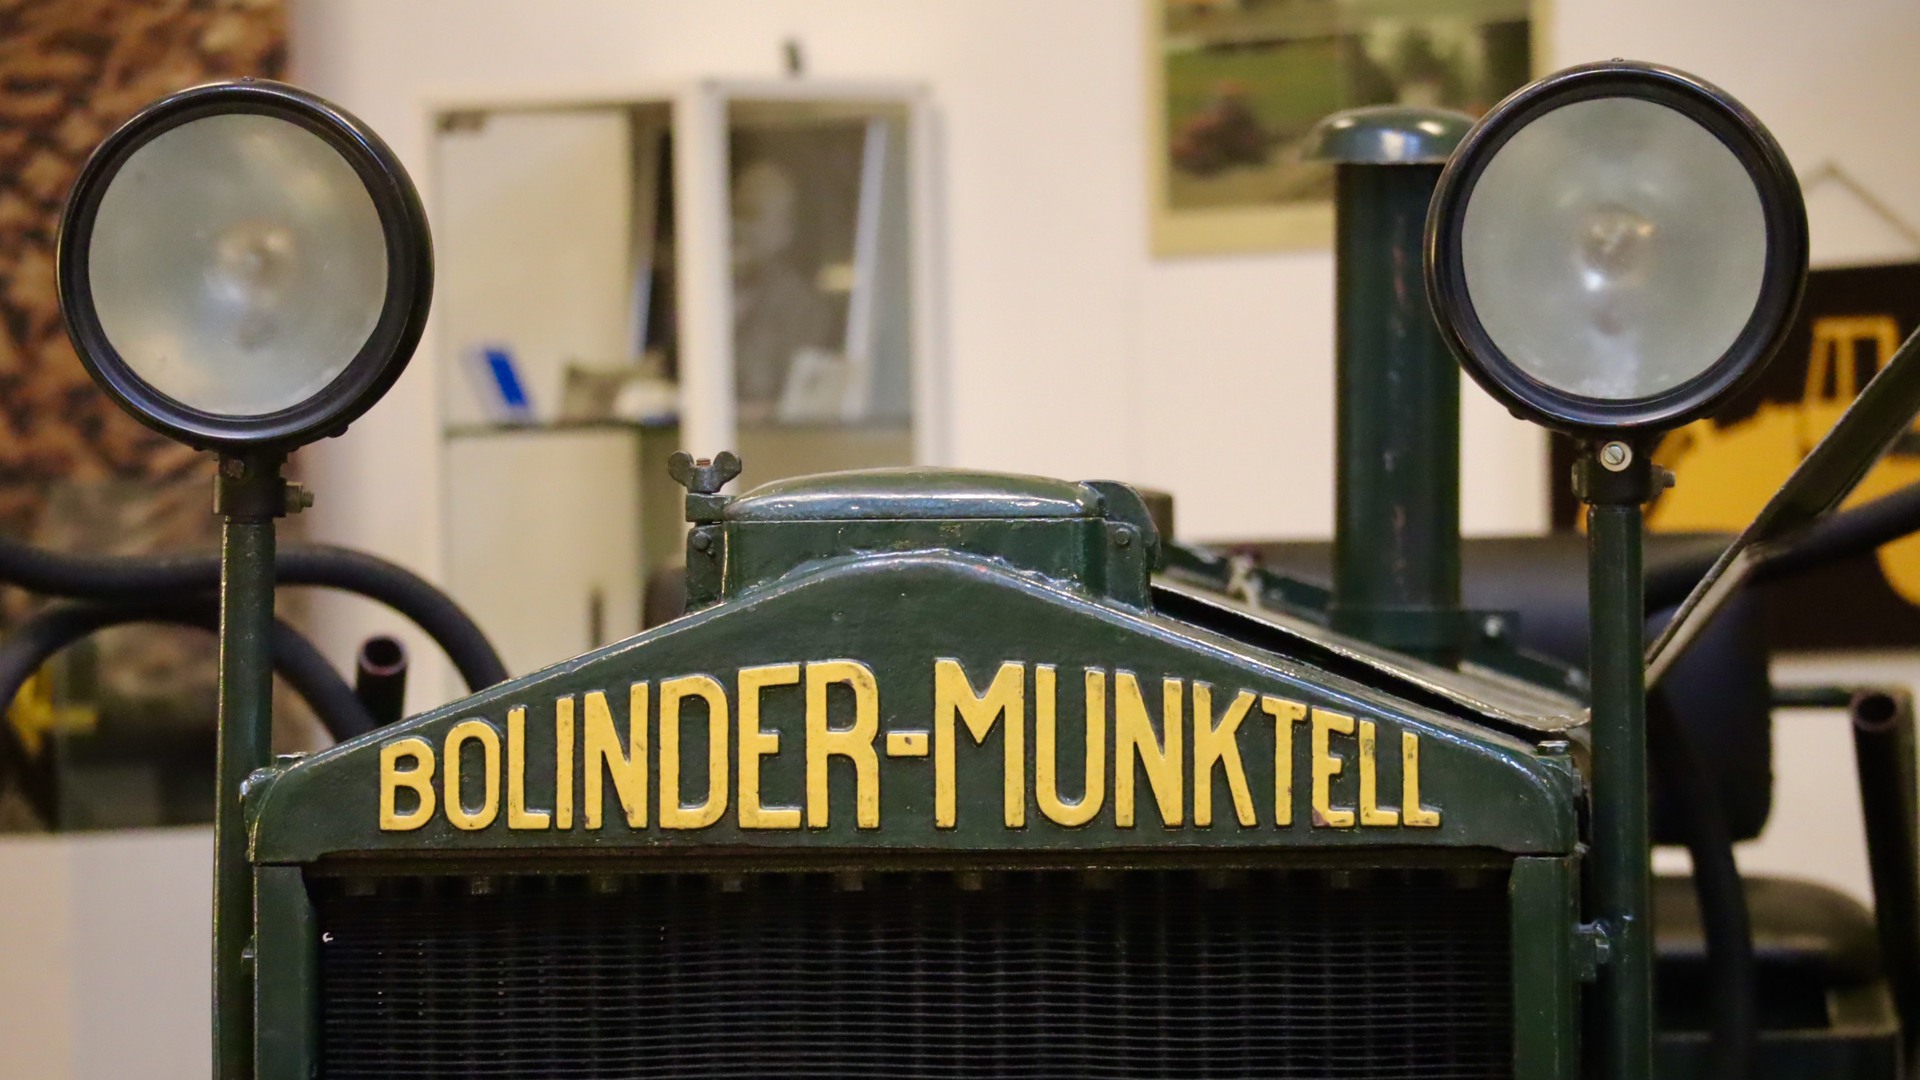 Green tractor with the text Bolinder-Munktell